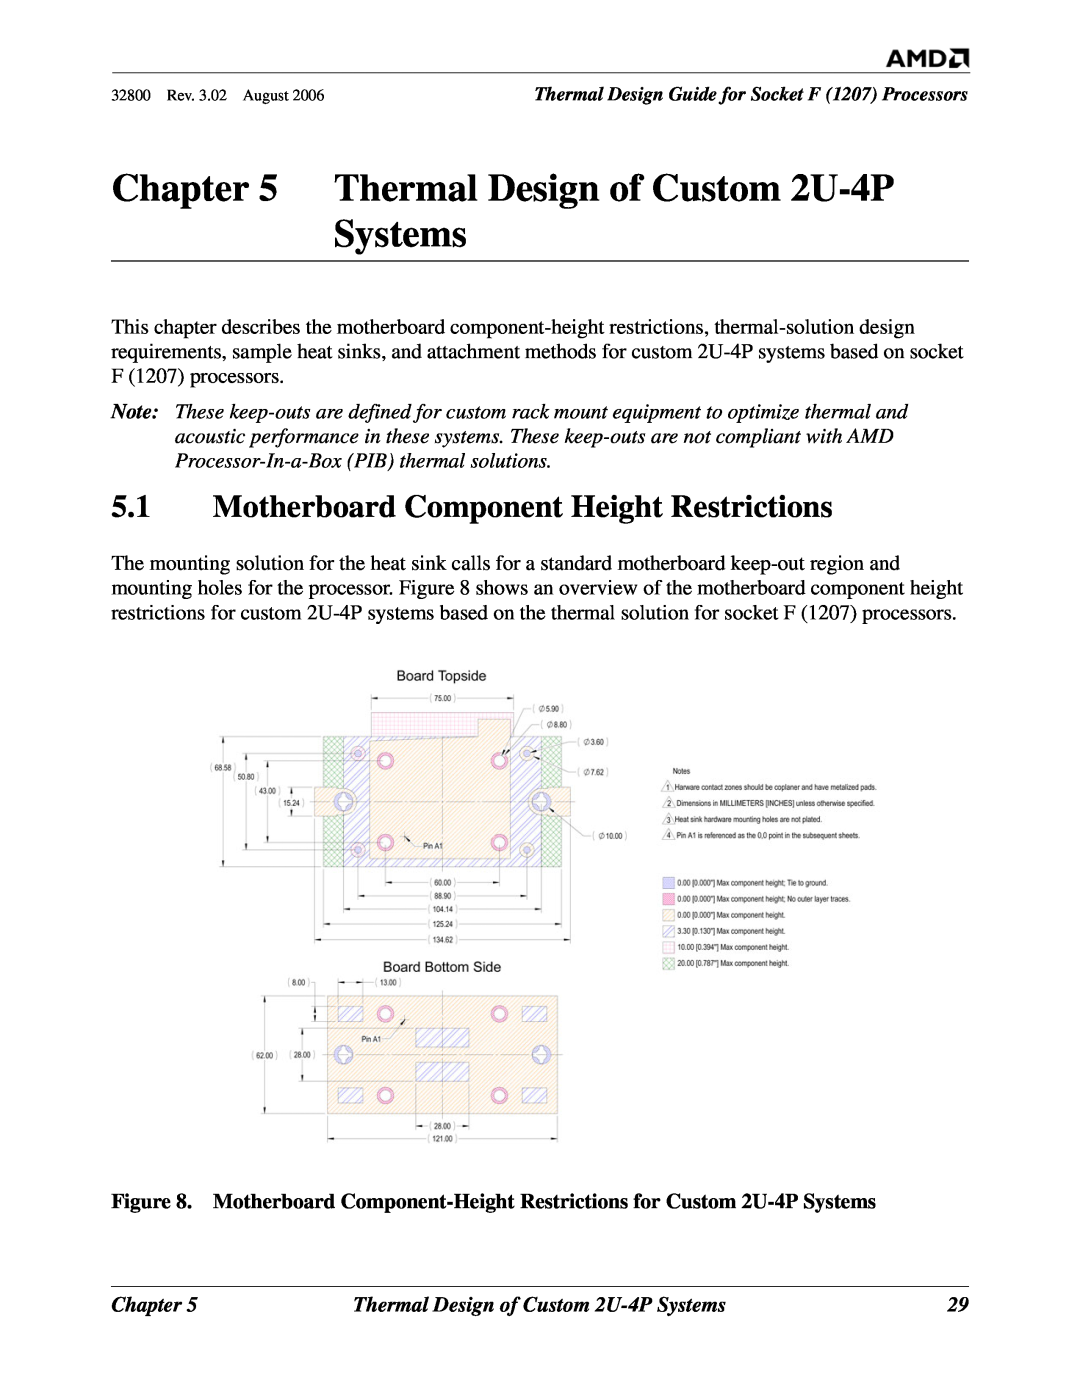 AMD 1207 manual Thermal Design of Custom 2U-4P Systems, Motherboard Component Height Restrictions, Chapter 